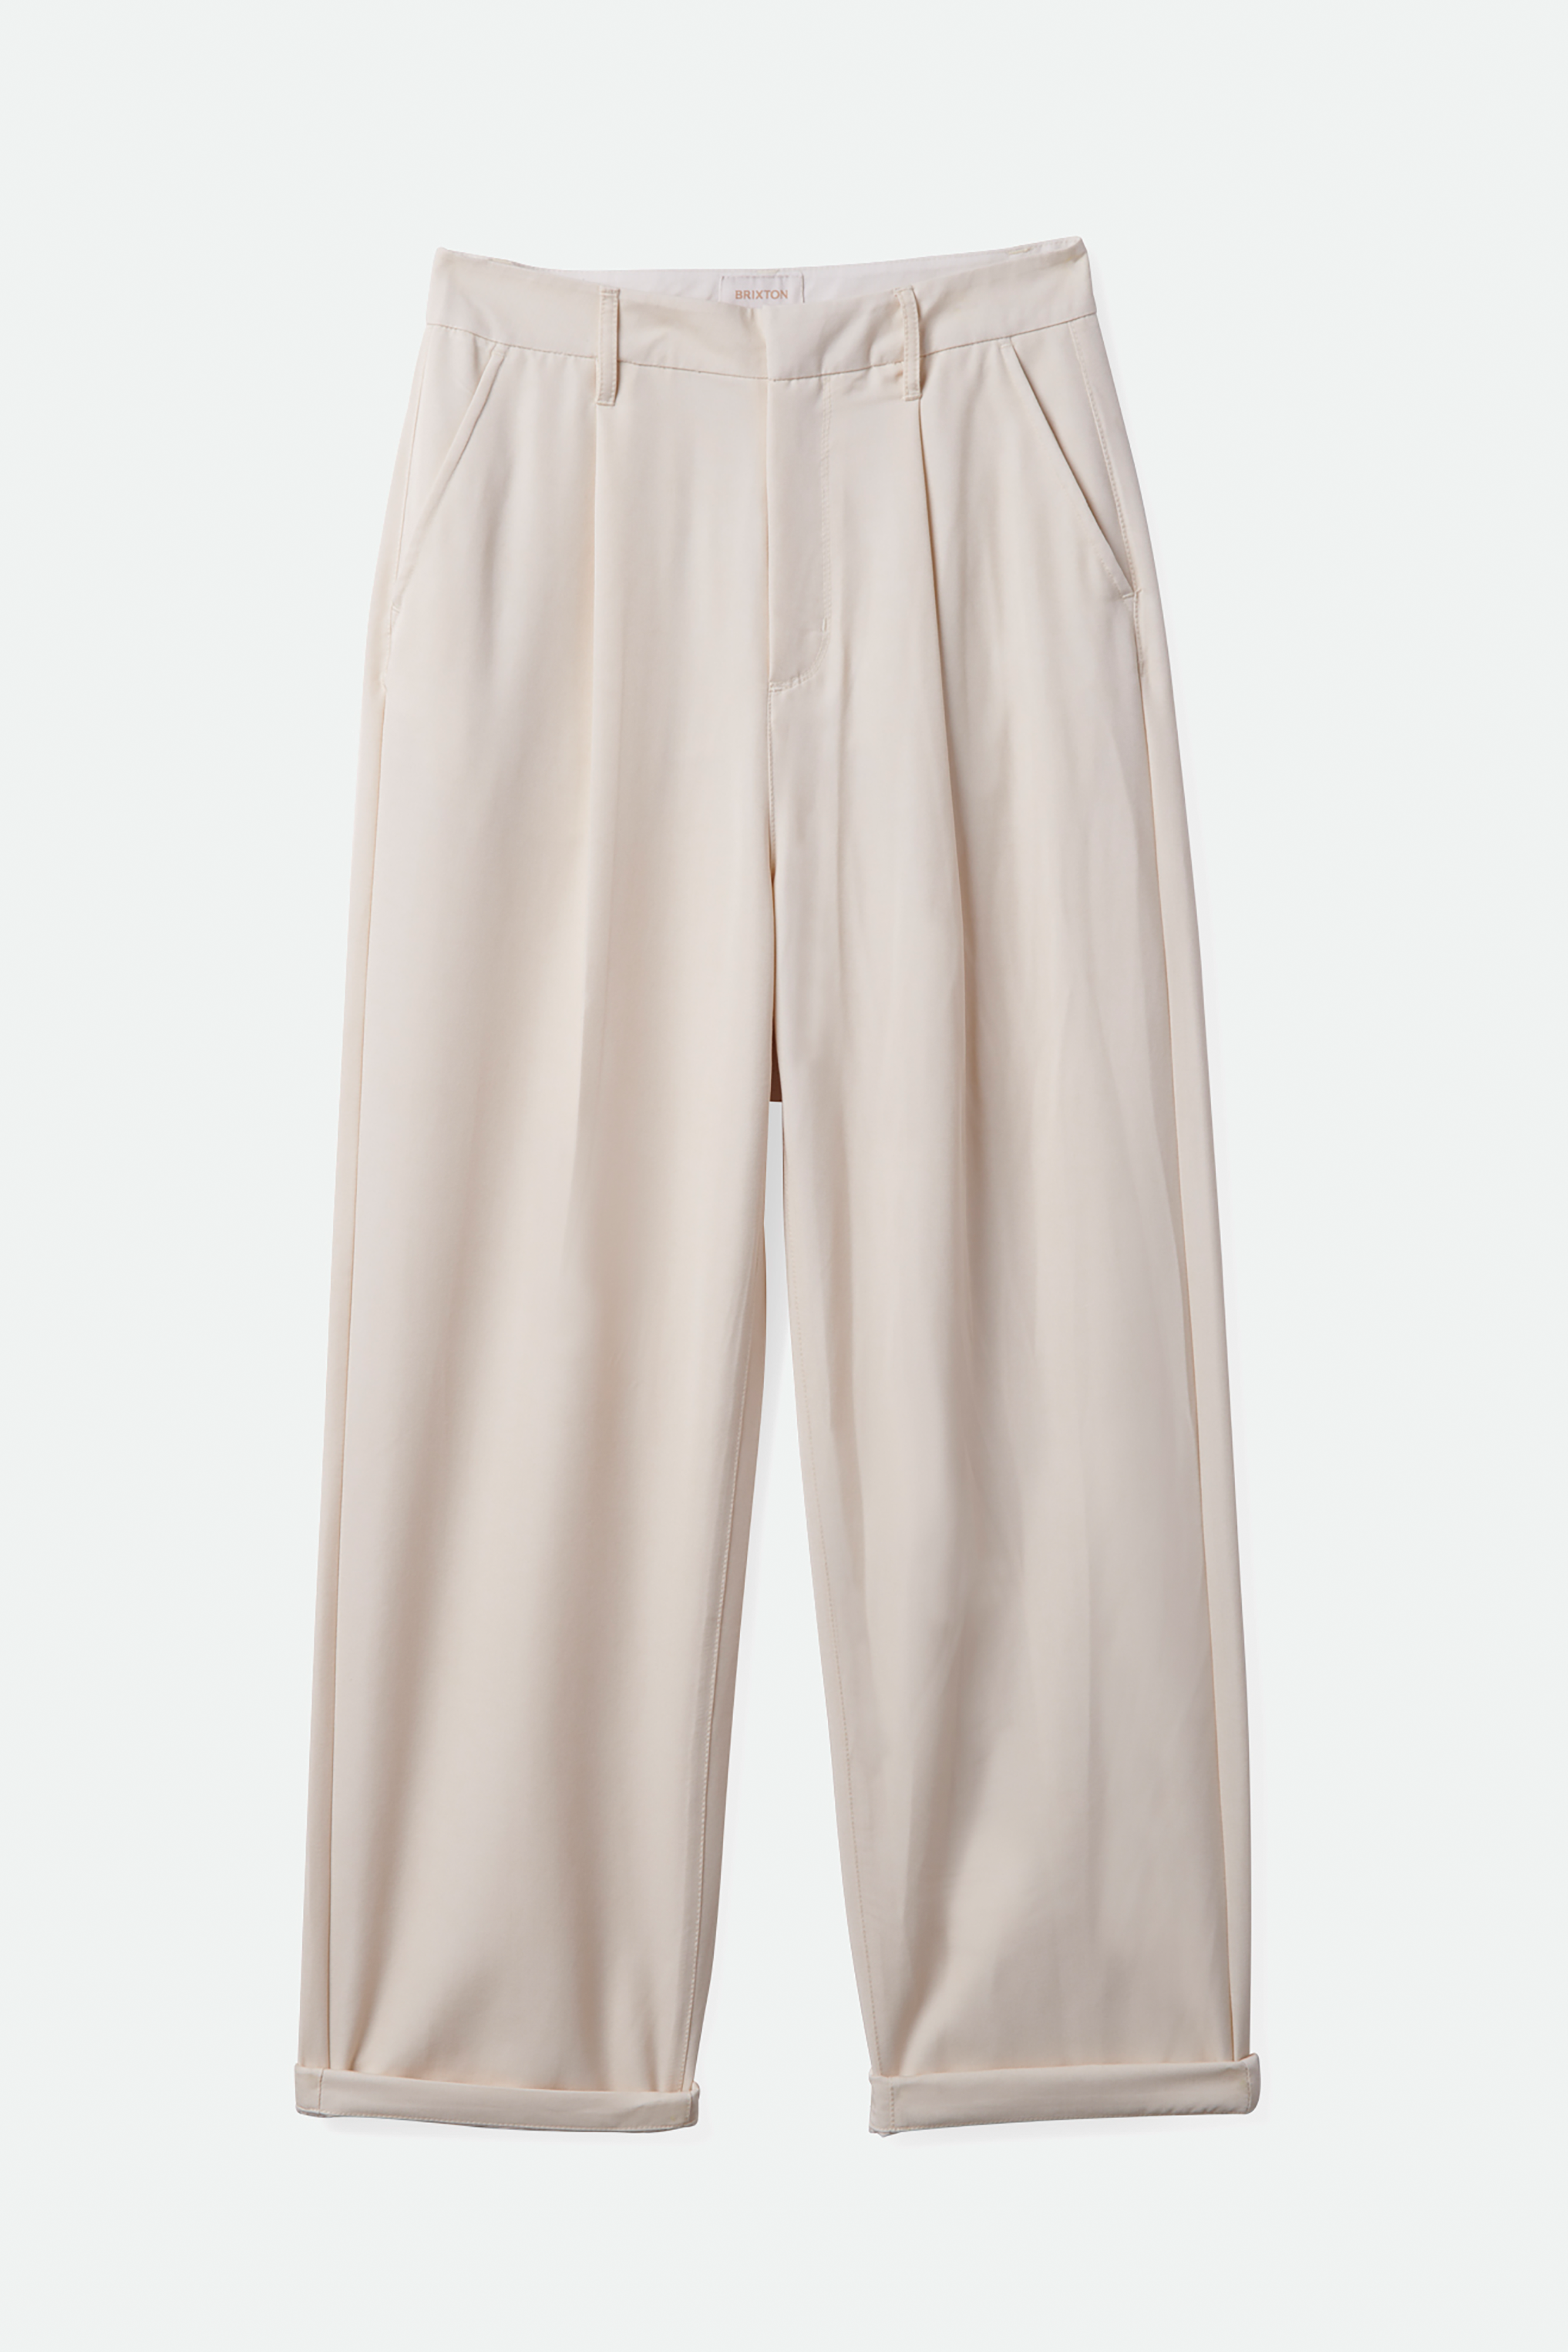 Victory Trouser Pant in White Smoke